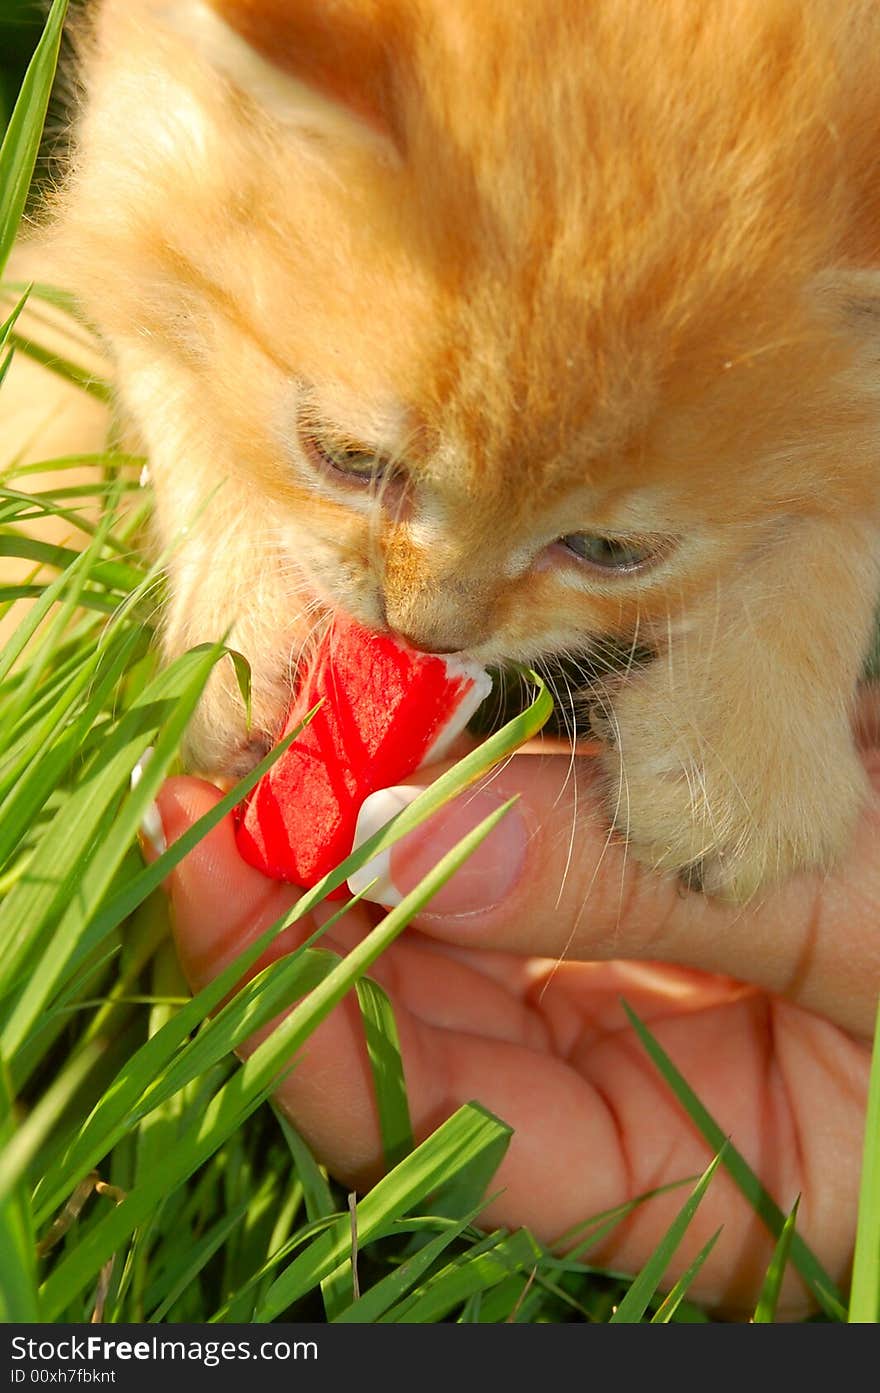 Human's hand with food feeding a little red kitten. Human's hand with food feeding a little red kitten